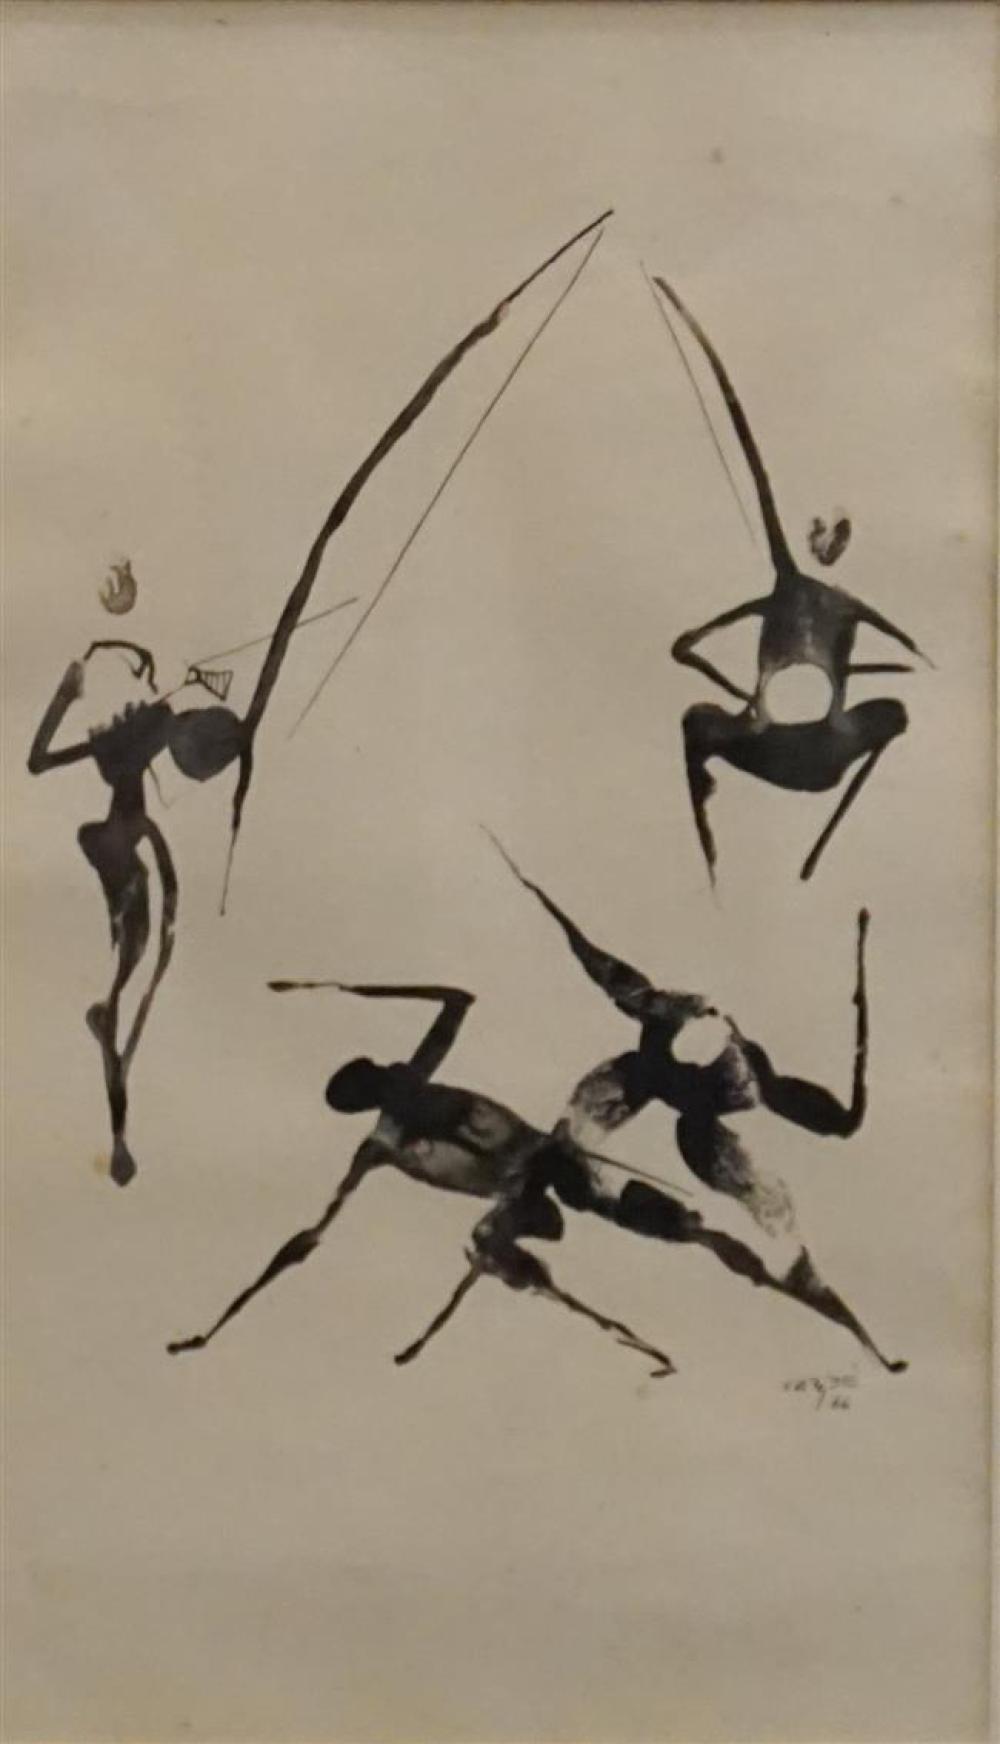 CAZZE ACROBATS INK AND WASH 3232c2